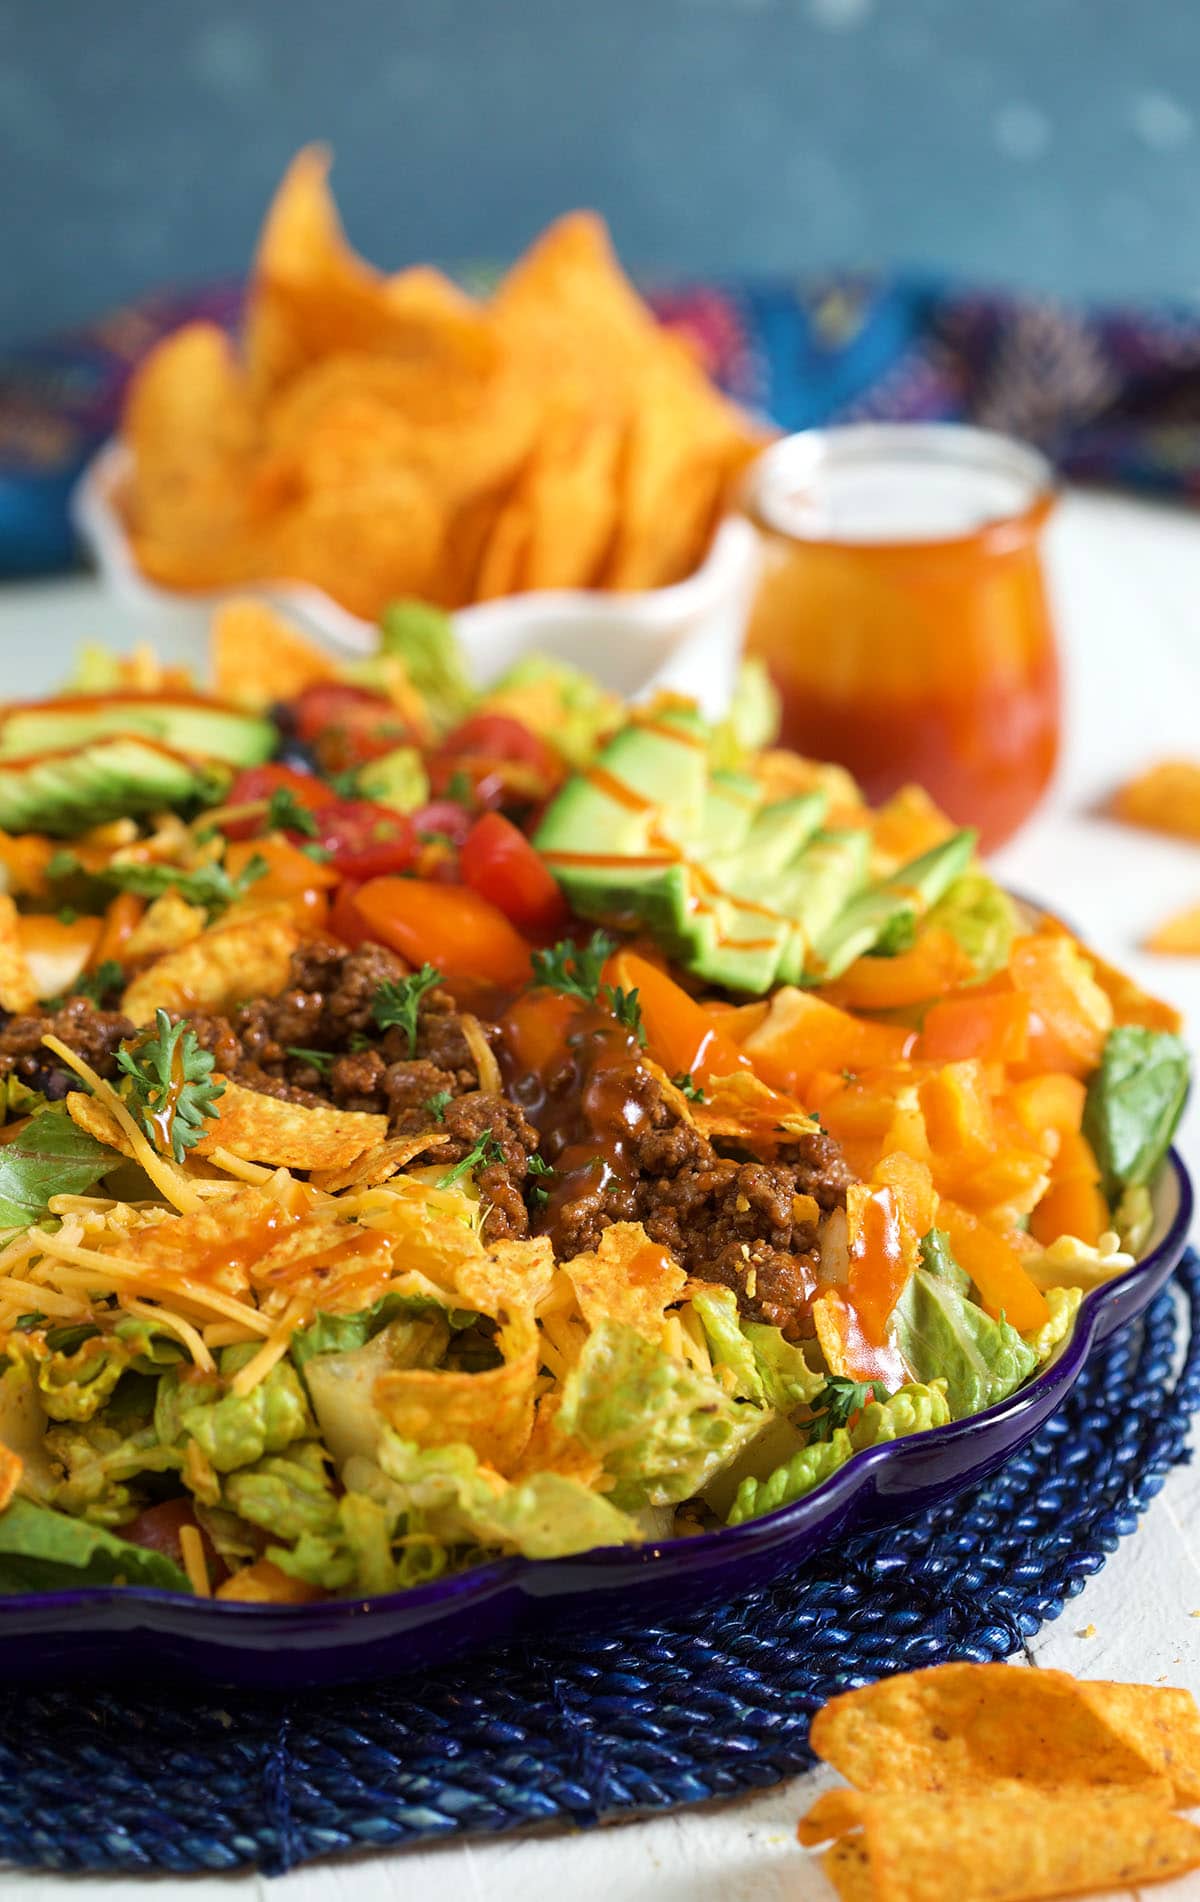 Taco salad is served on a large blue plate and is ready to eat. 